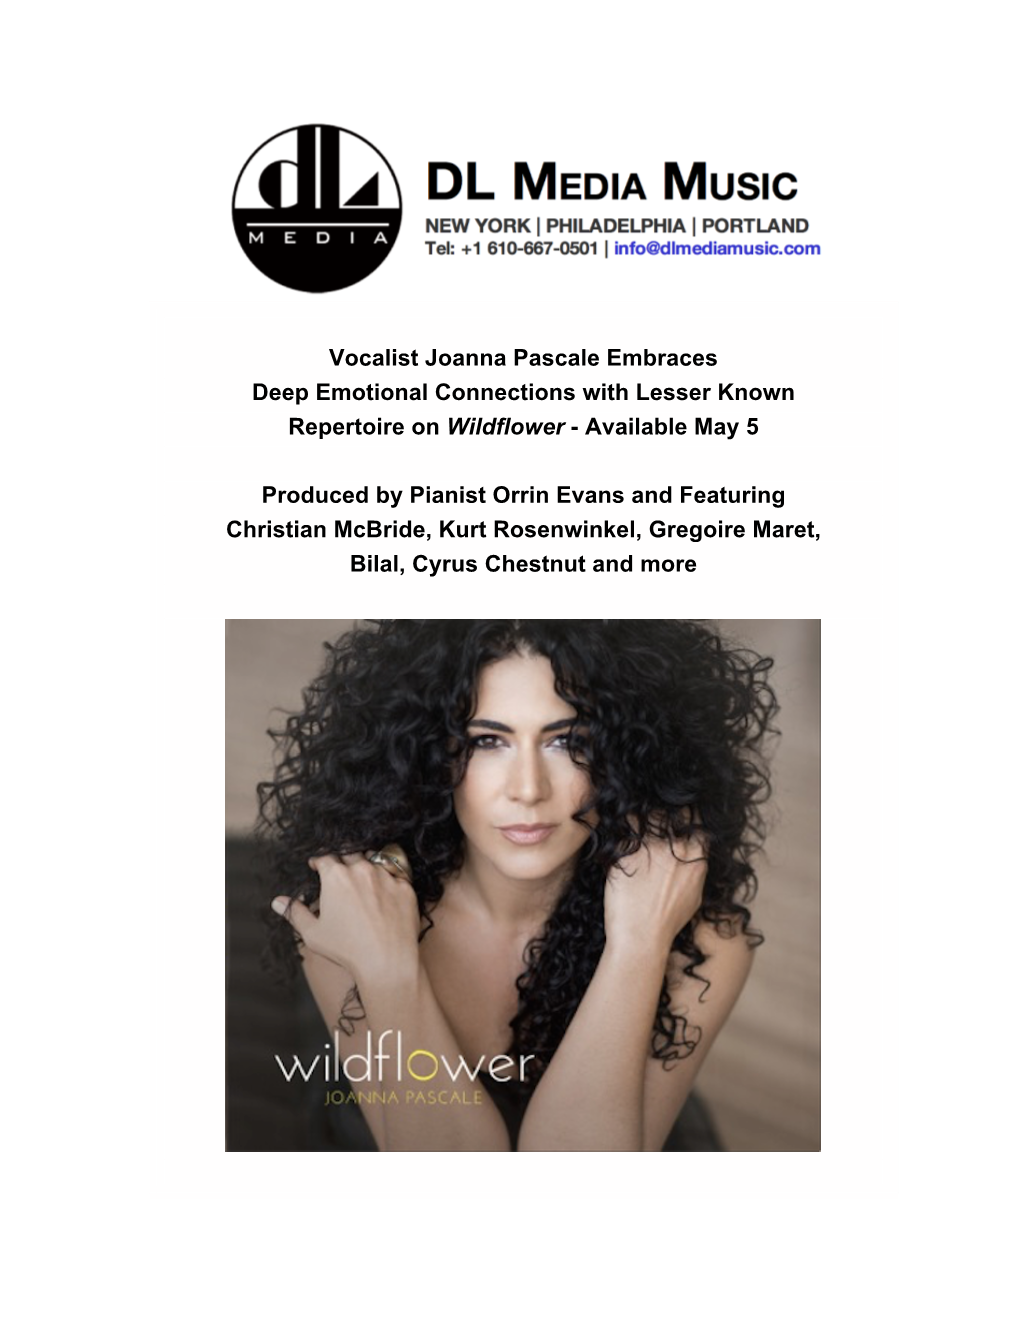 Vocalist Joanna Pascale Embraces Deep Emotional Connections with Lesser Known Repertoire on Wildflower - Available May 5